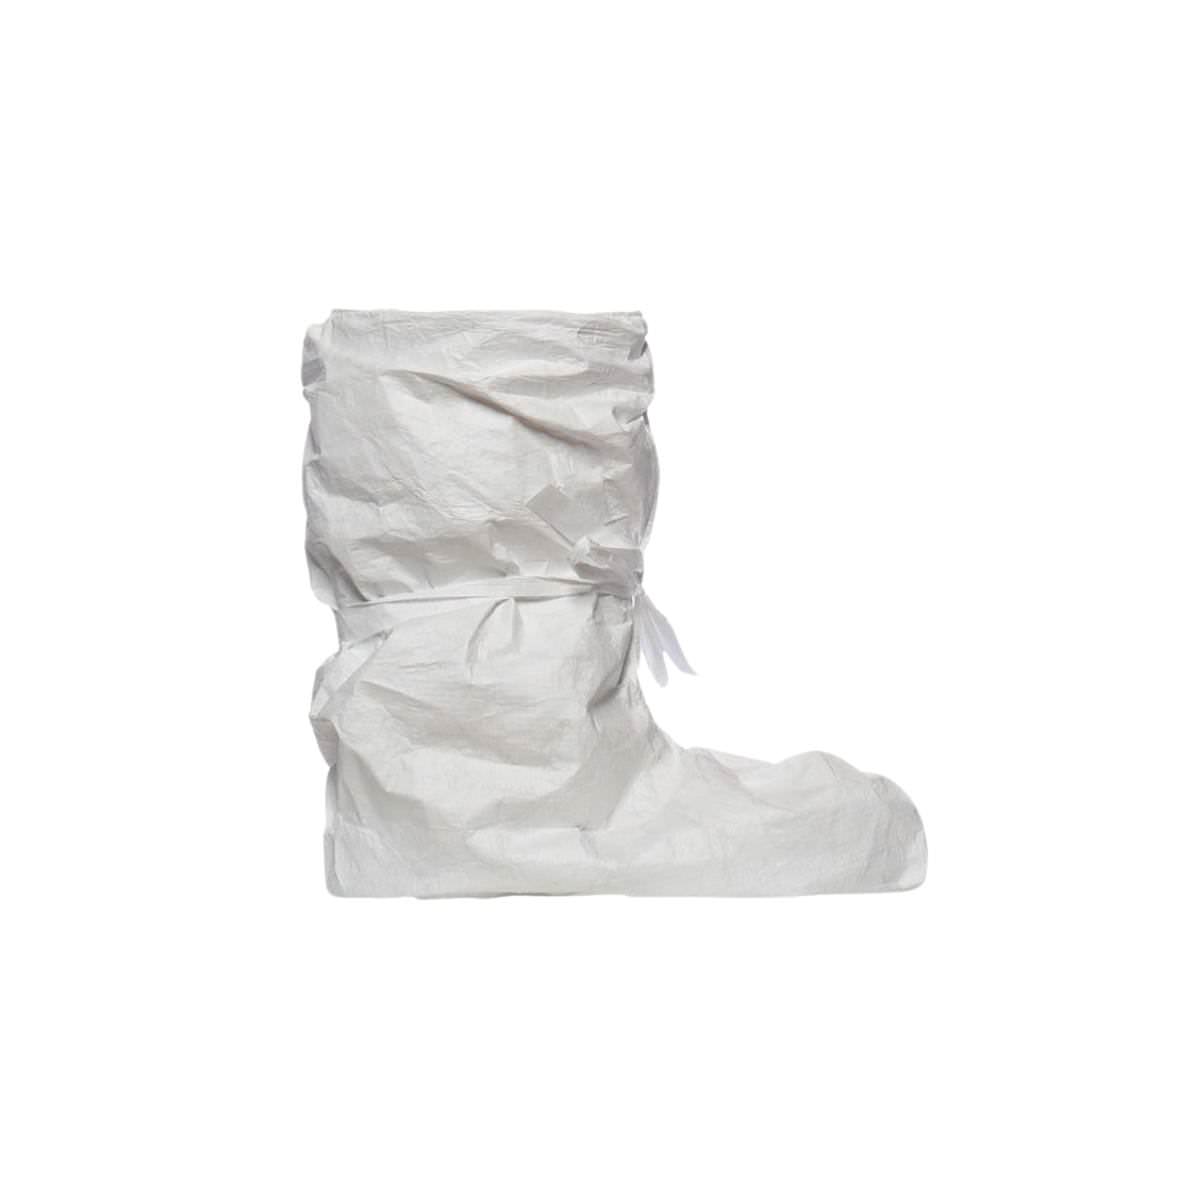 DuPont™ Tyvek® Boot Covers with Ties (Each)